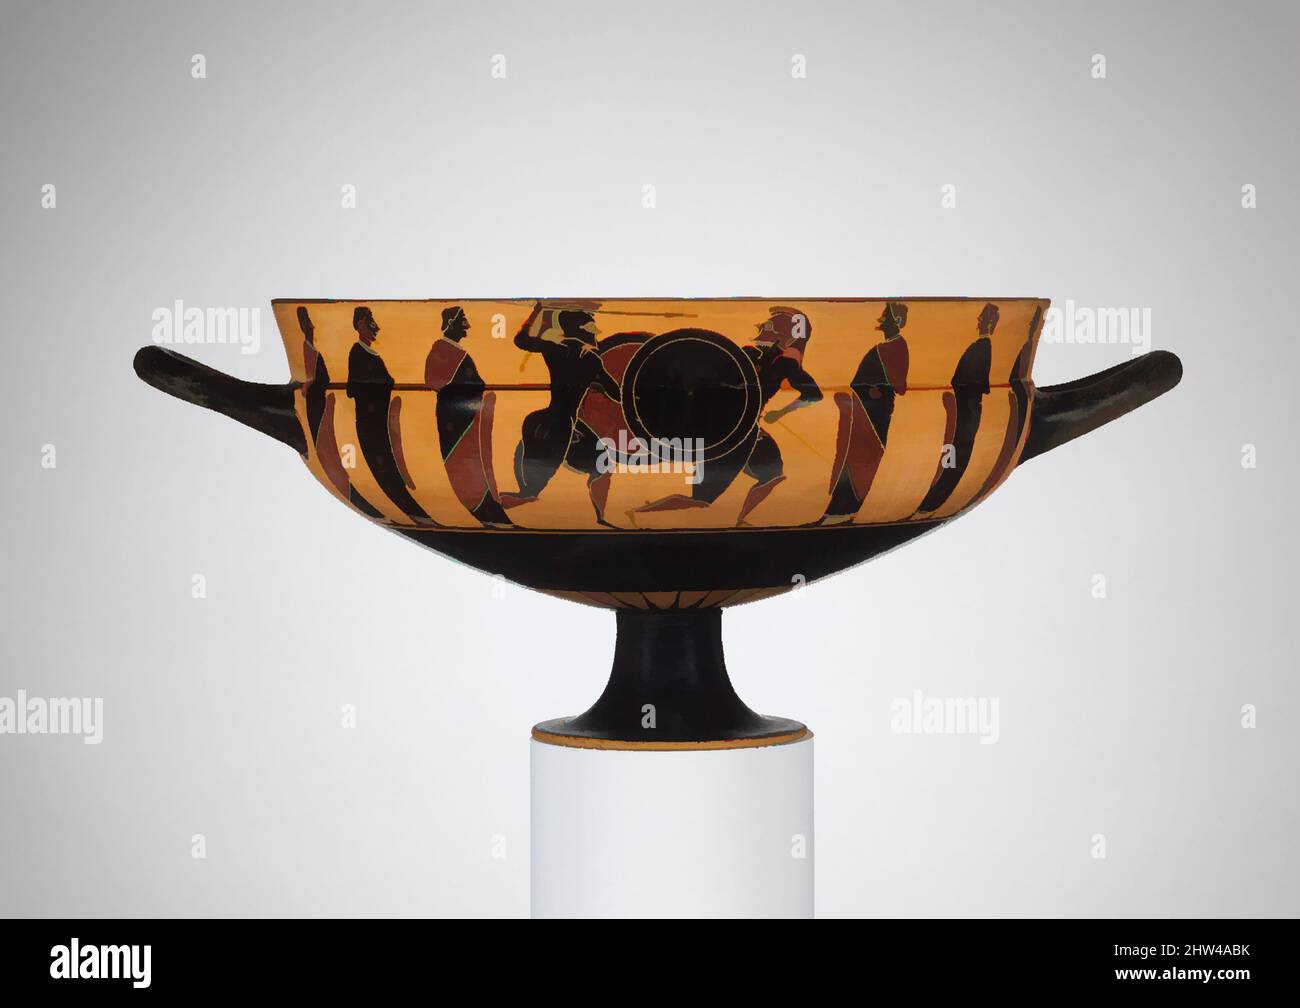 Art inspired by Terracotta kylix: Siana cup (drinking cup), Archaic, ca. 560–550 B.C., Greek, Attic, Terracotta; black-figure, H. 6 3/16 in. (15.7 cm), Vases, Interior, runner., Exterior, obverse and reverse, combat between onlookers, Classic works modernized by Artotop with a splash of modernity. Shapes, color and value, eye-catching visual impact on art. Emotions through freedom of artworks in a contemporary way. A timeless message pursuing a wildly creative new direction. Artists turning to the digital medium and creating the Artotop NFT Stock Photo